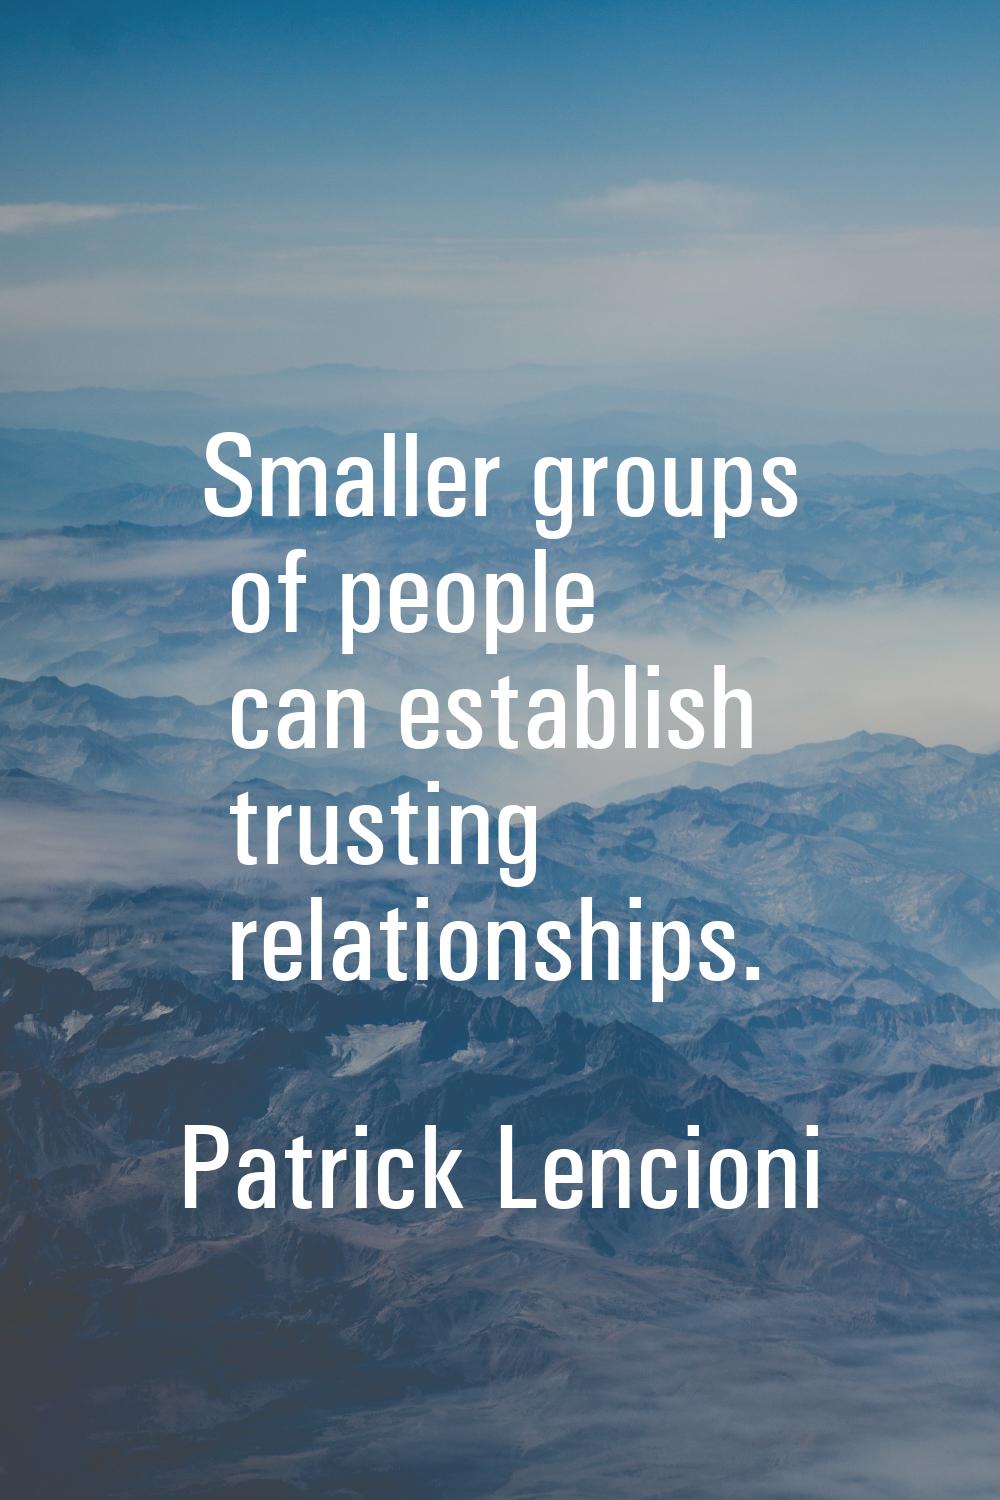 Smaller groups of people can establish trusting relationships.